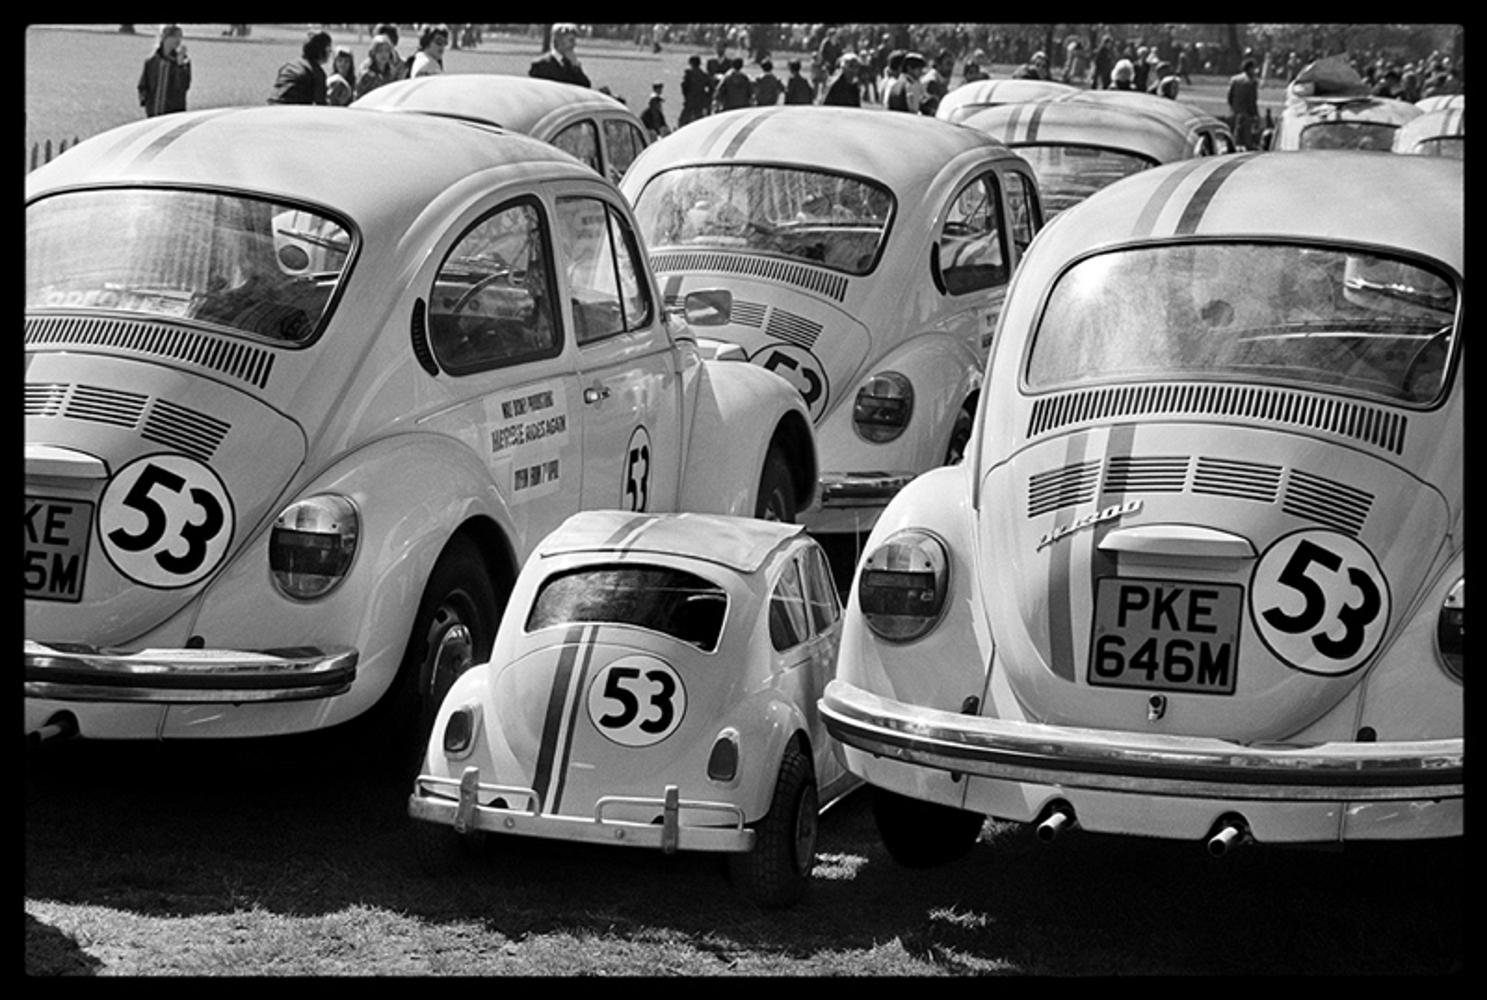 Baby Love Bug
by Arthur Steel

Baby Love Bug – Volkswagen Owner’s Meet, Great Britain 1980

All prints are hand signed limited editions, no further prints are produced once sold.

paper size - 16 x 13" / 41 x 33 cm 
signed and numbered by artist on